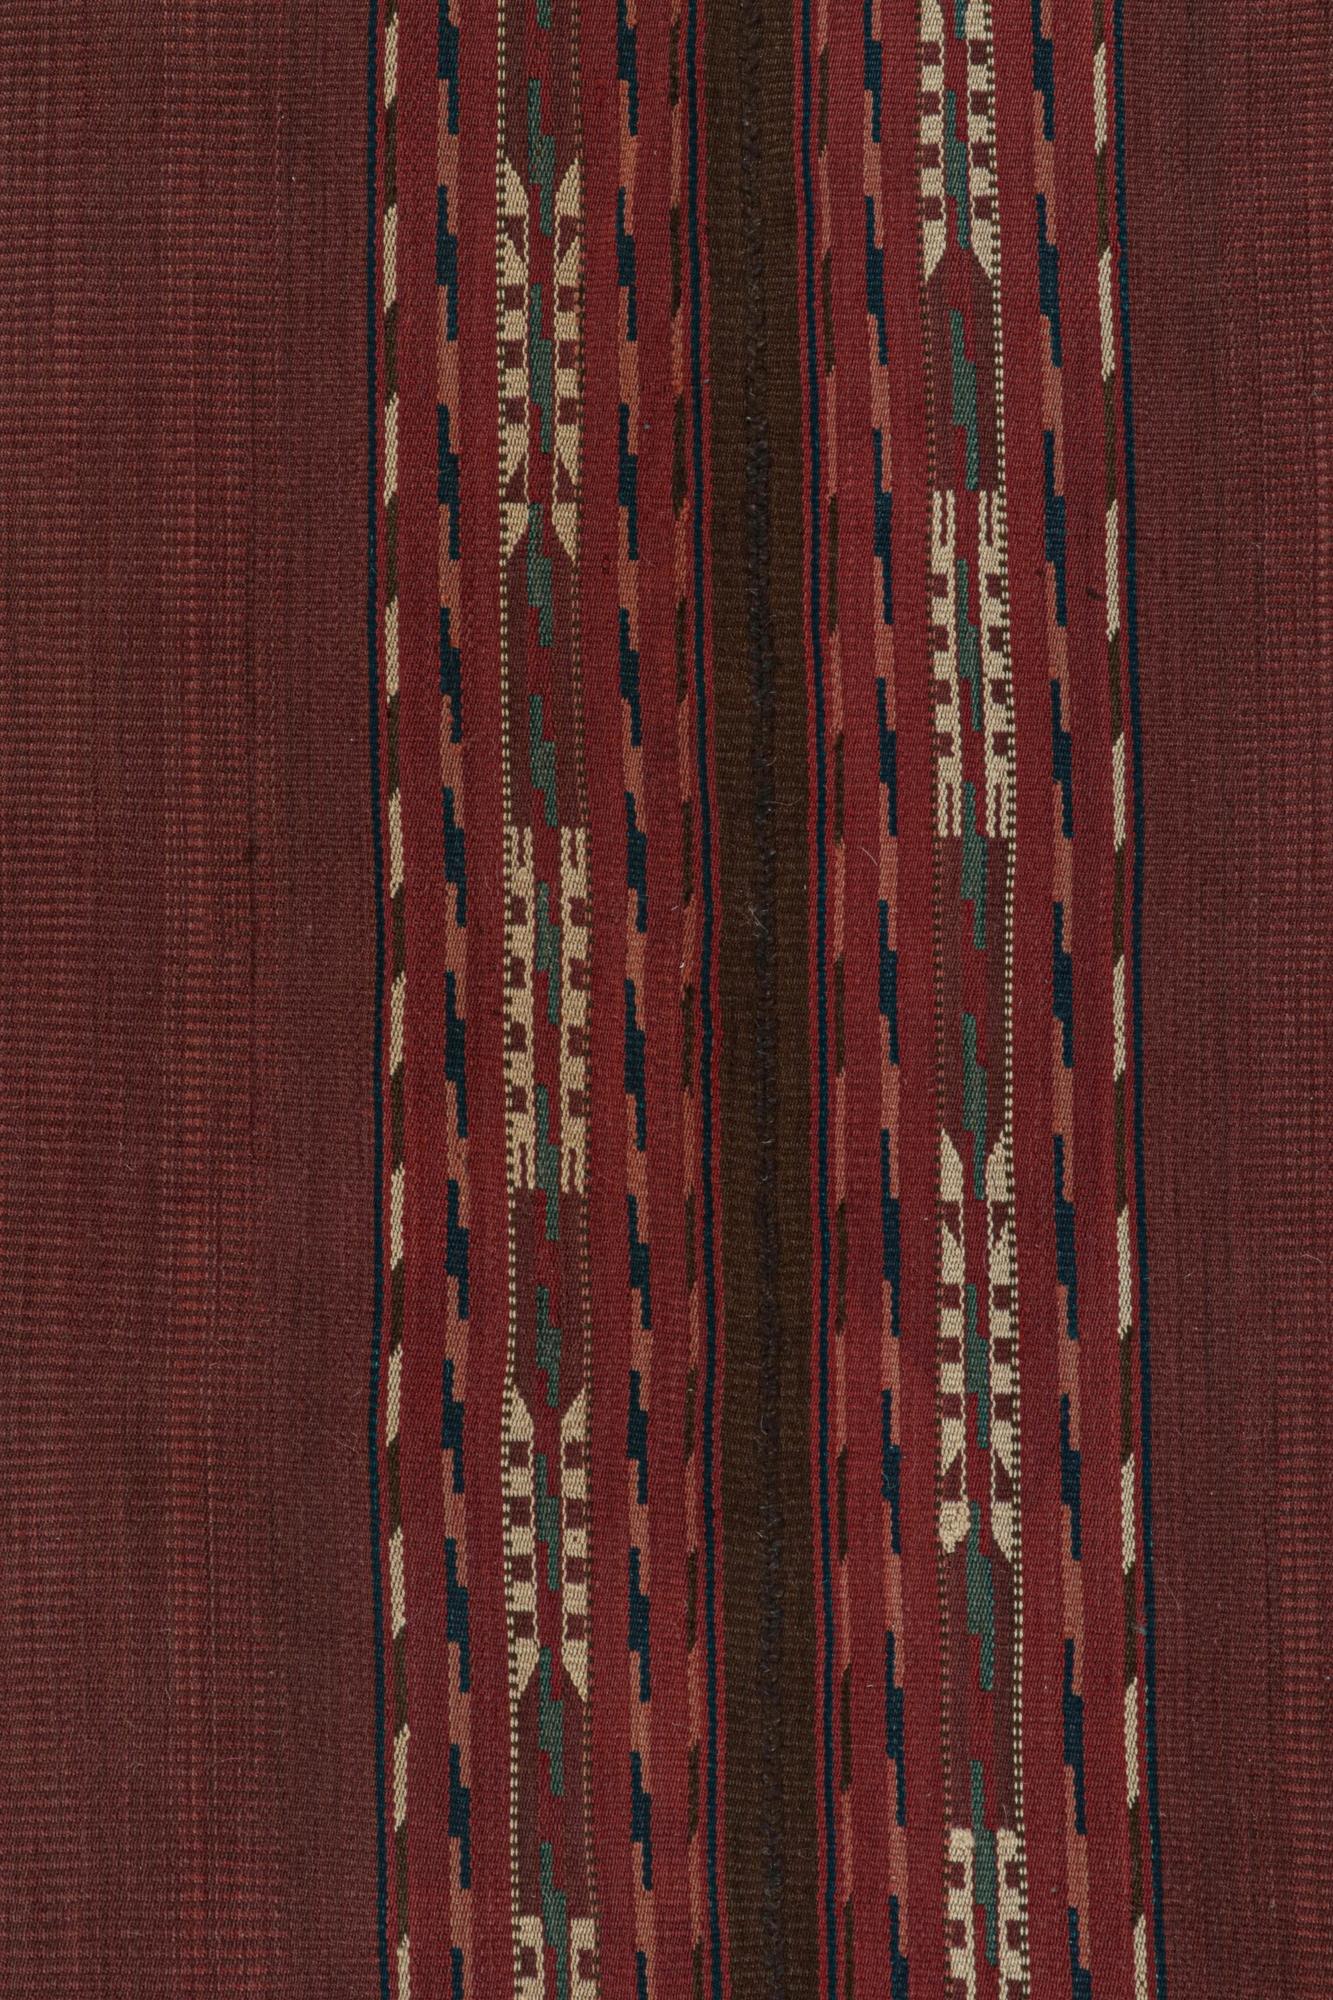 Mid-20th Century Vintage Persian Kilim in Burgundy Stripes with Geometric Patterns For Sale